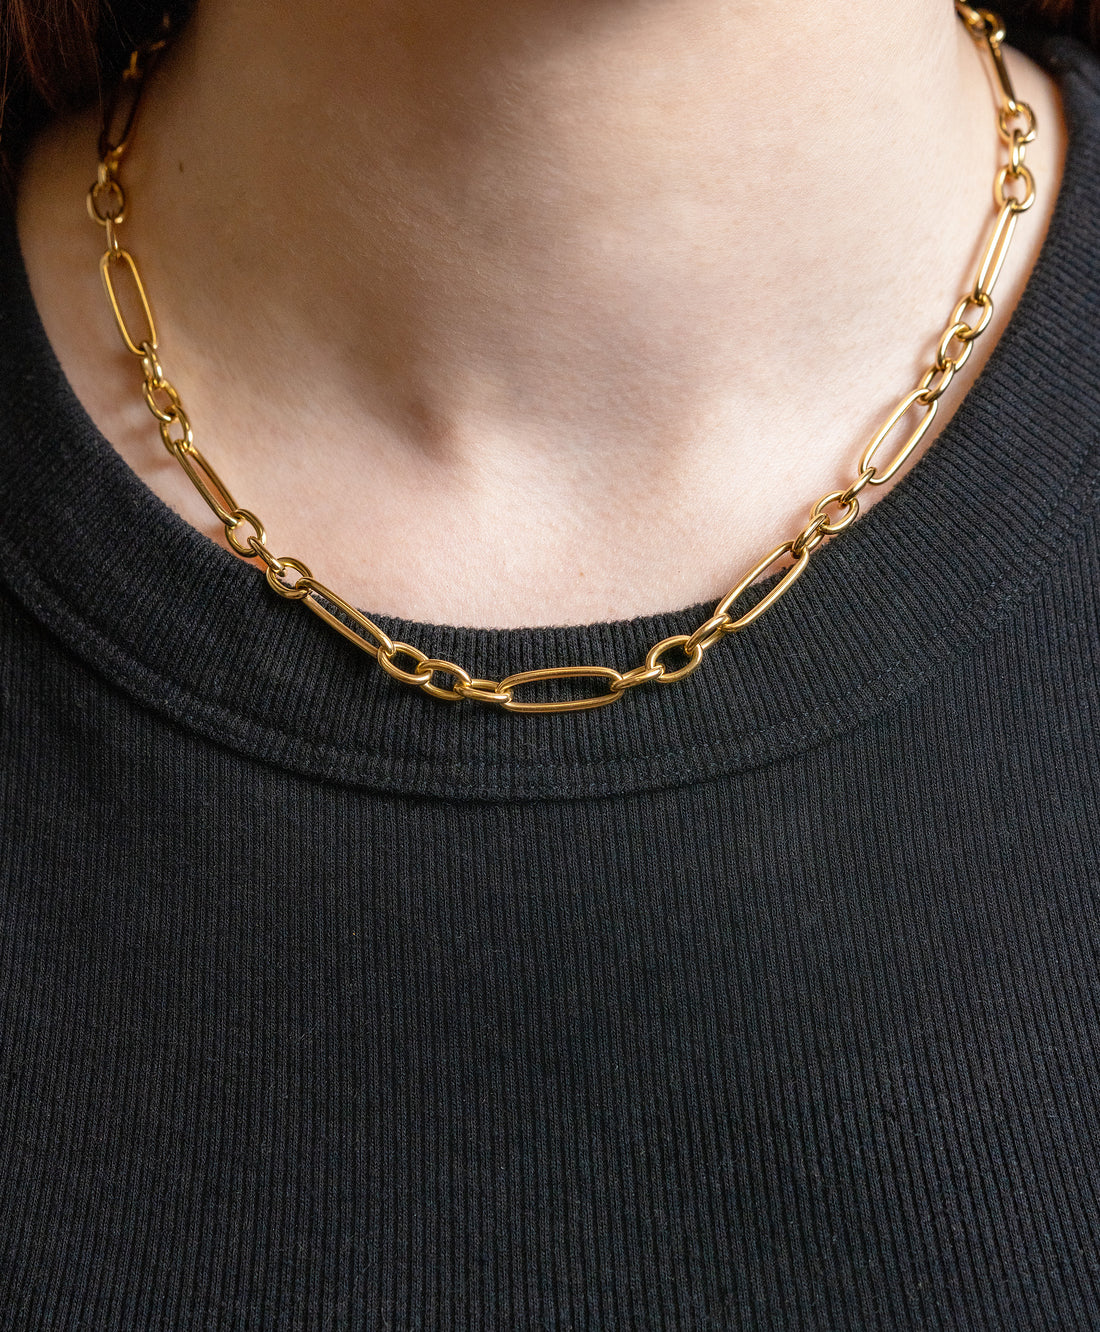 Roberto Coin Alternating Oval Link Chain Necklace - Skeie's Jewelers